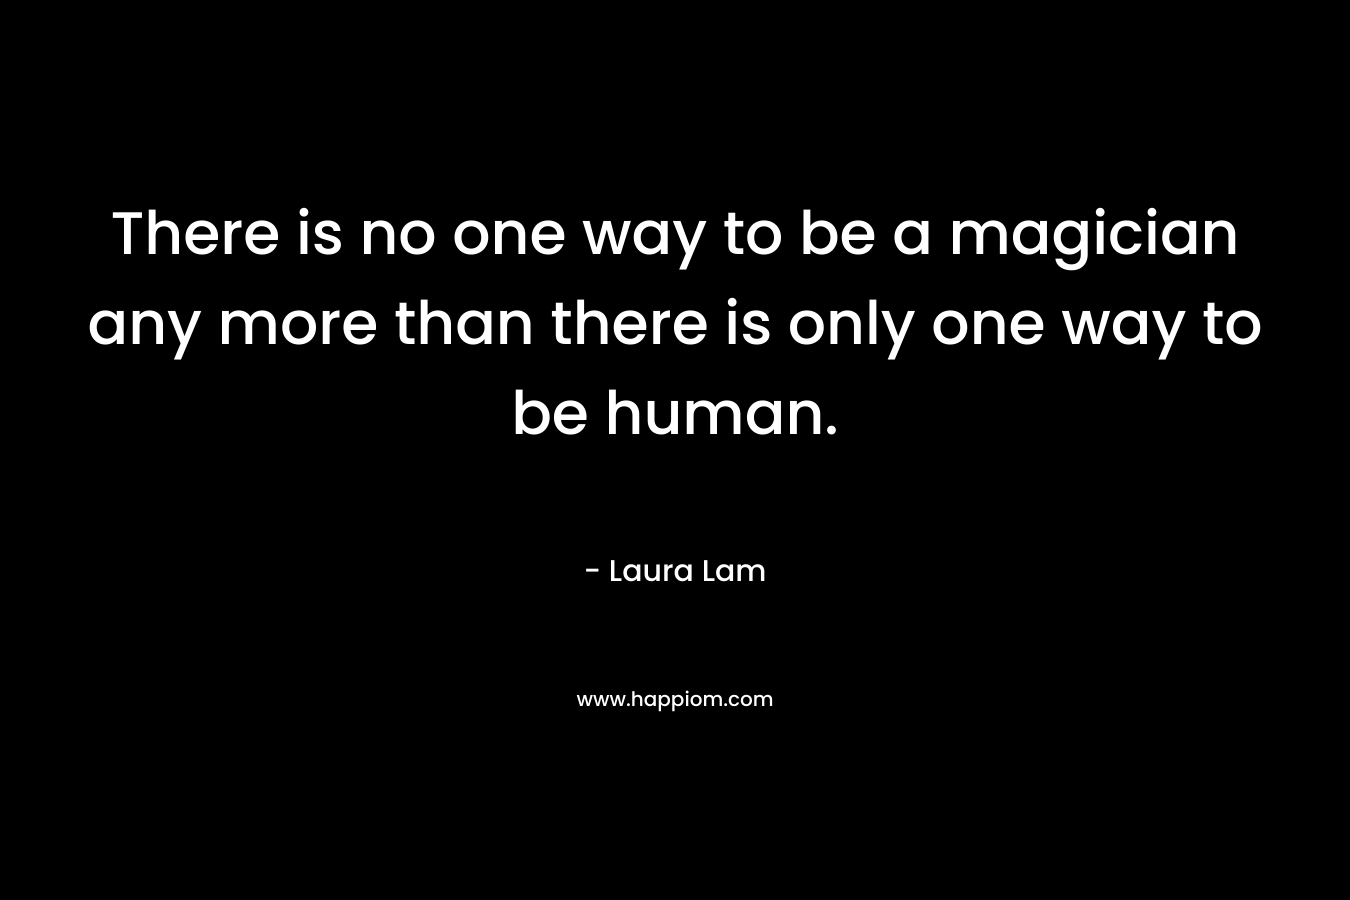 There is no one way to be a magician any more than there is only one way to be human.